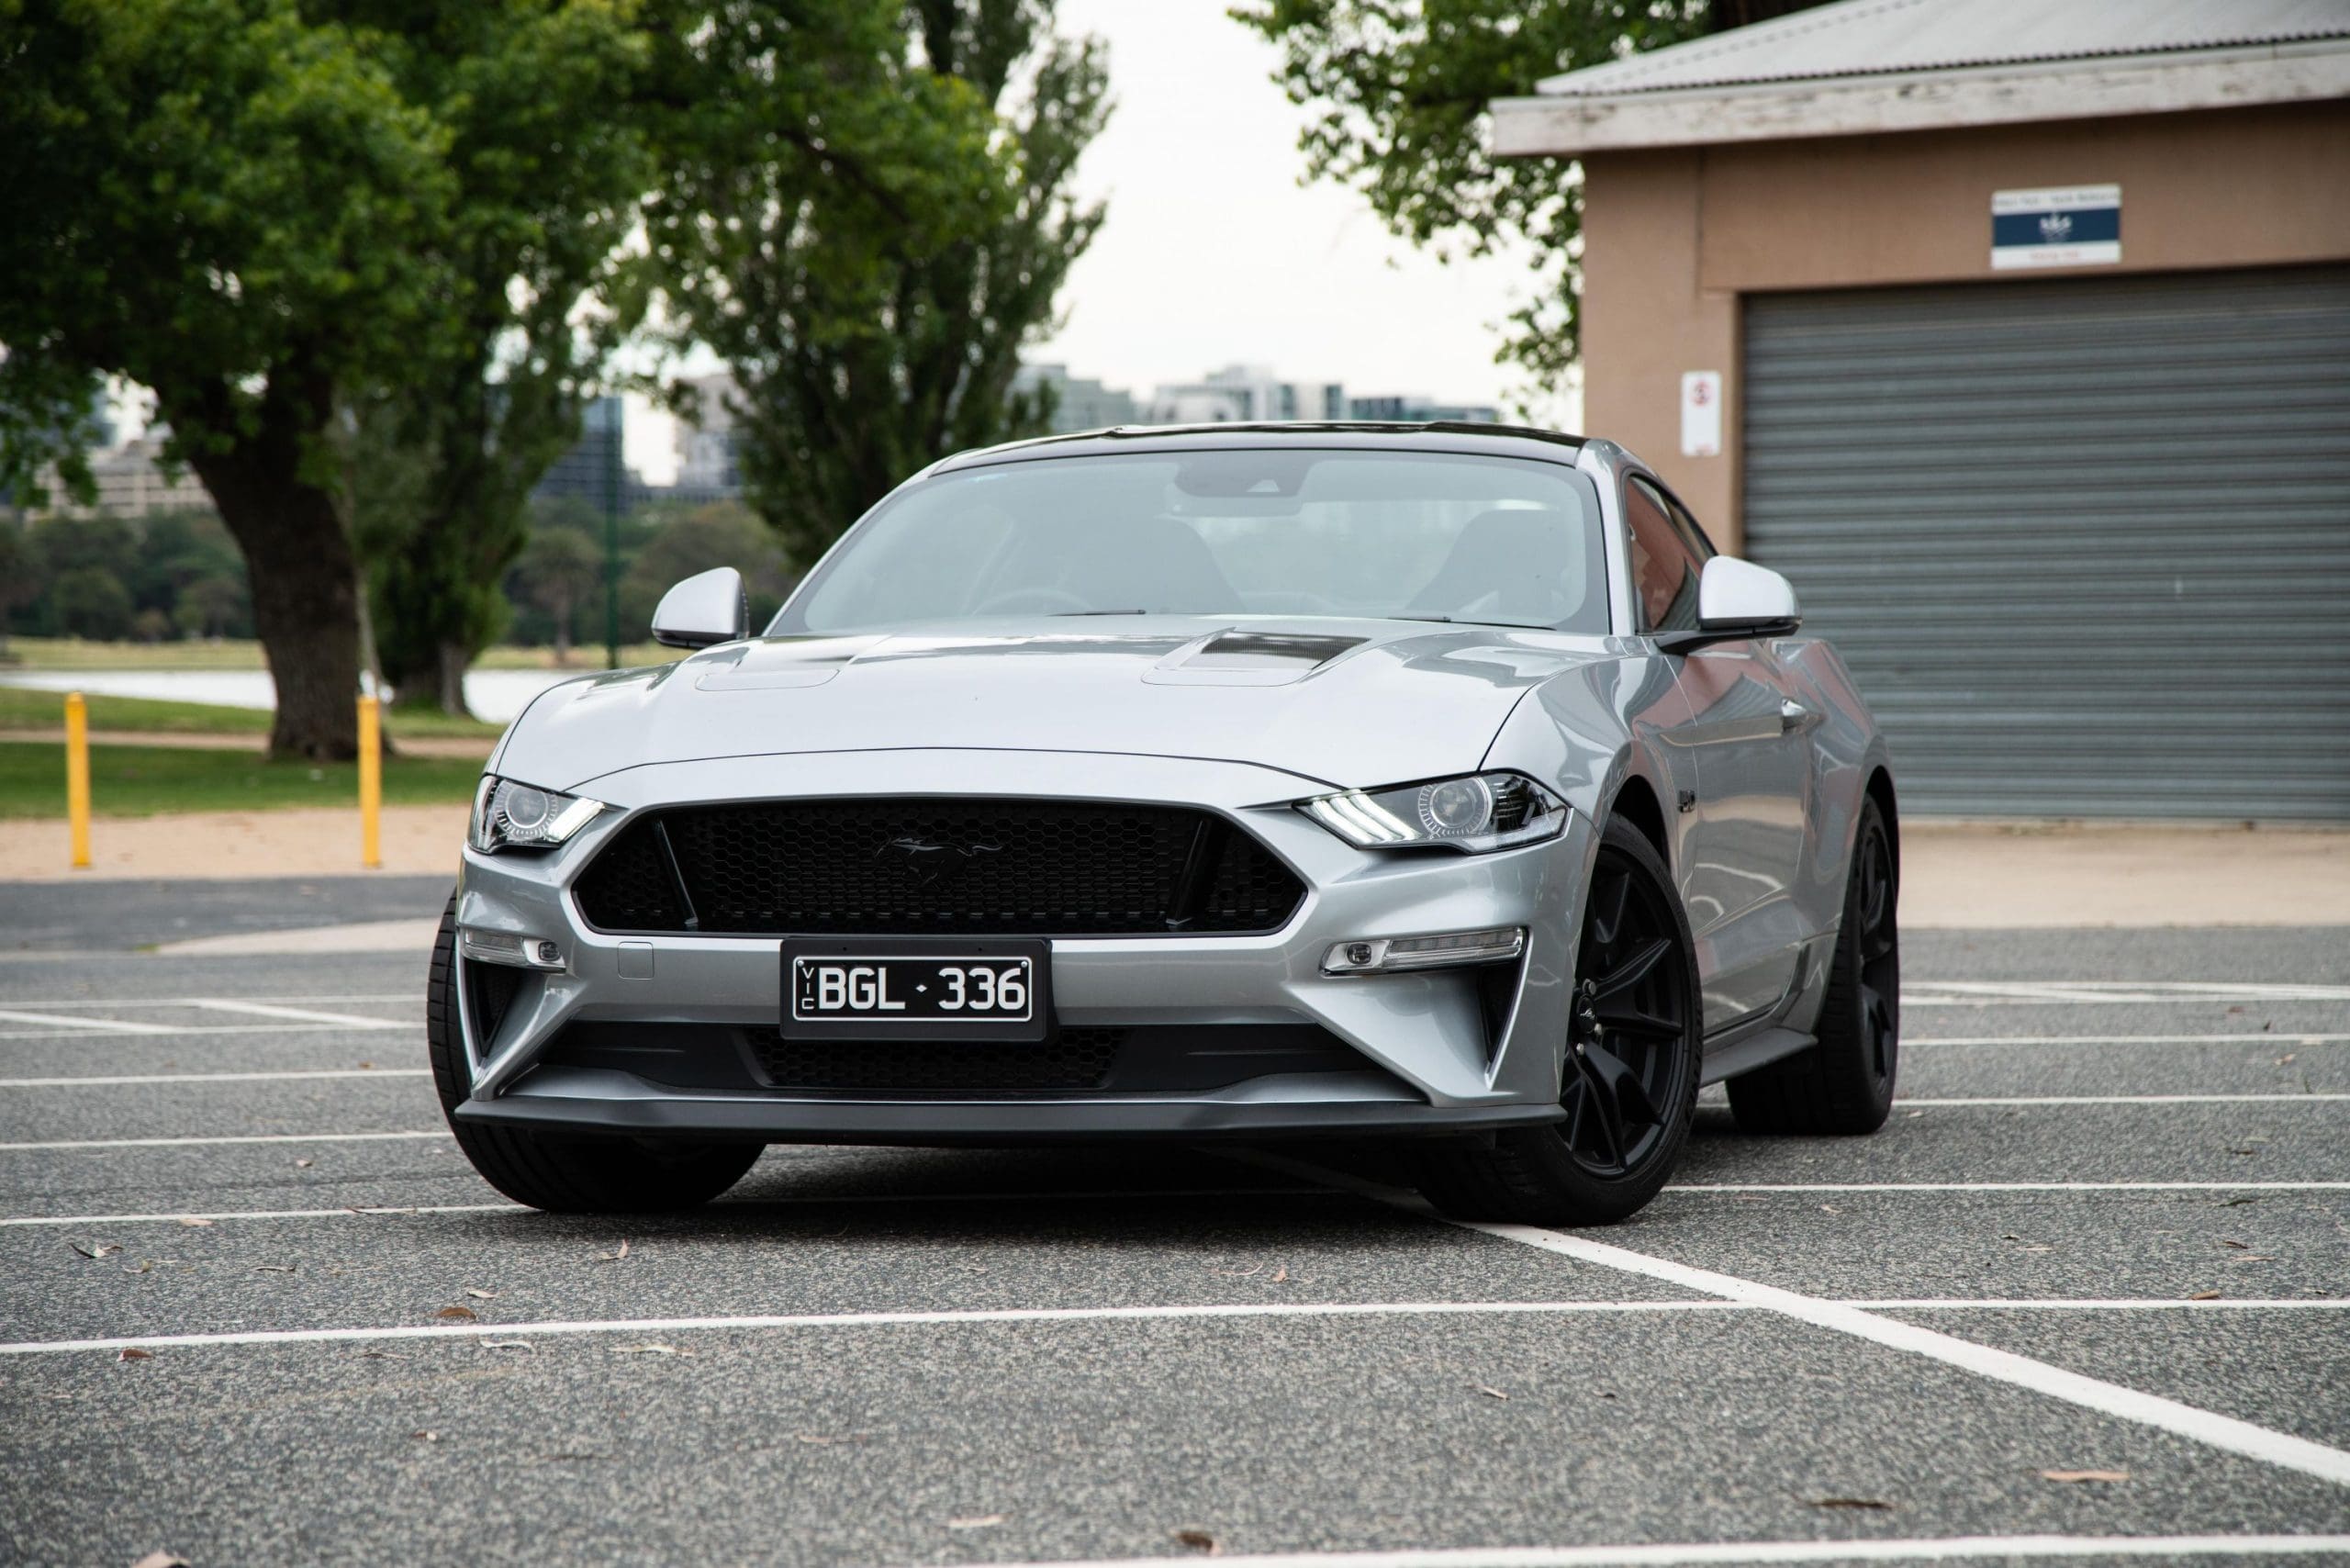 Mustang Of The Day: 2021 Ford Mustang GT Fastback